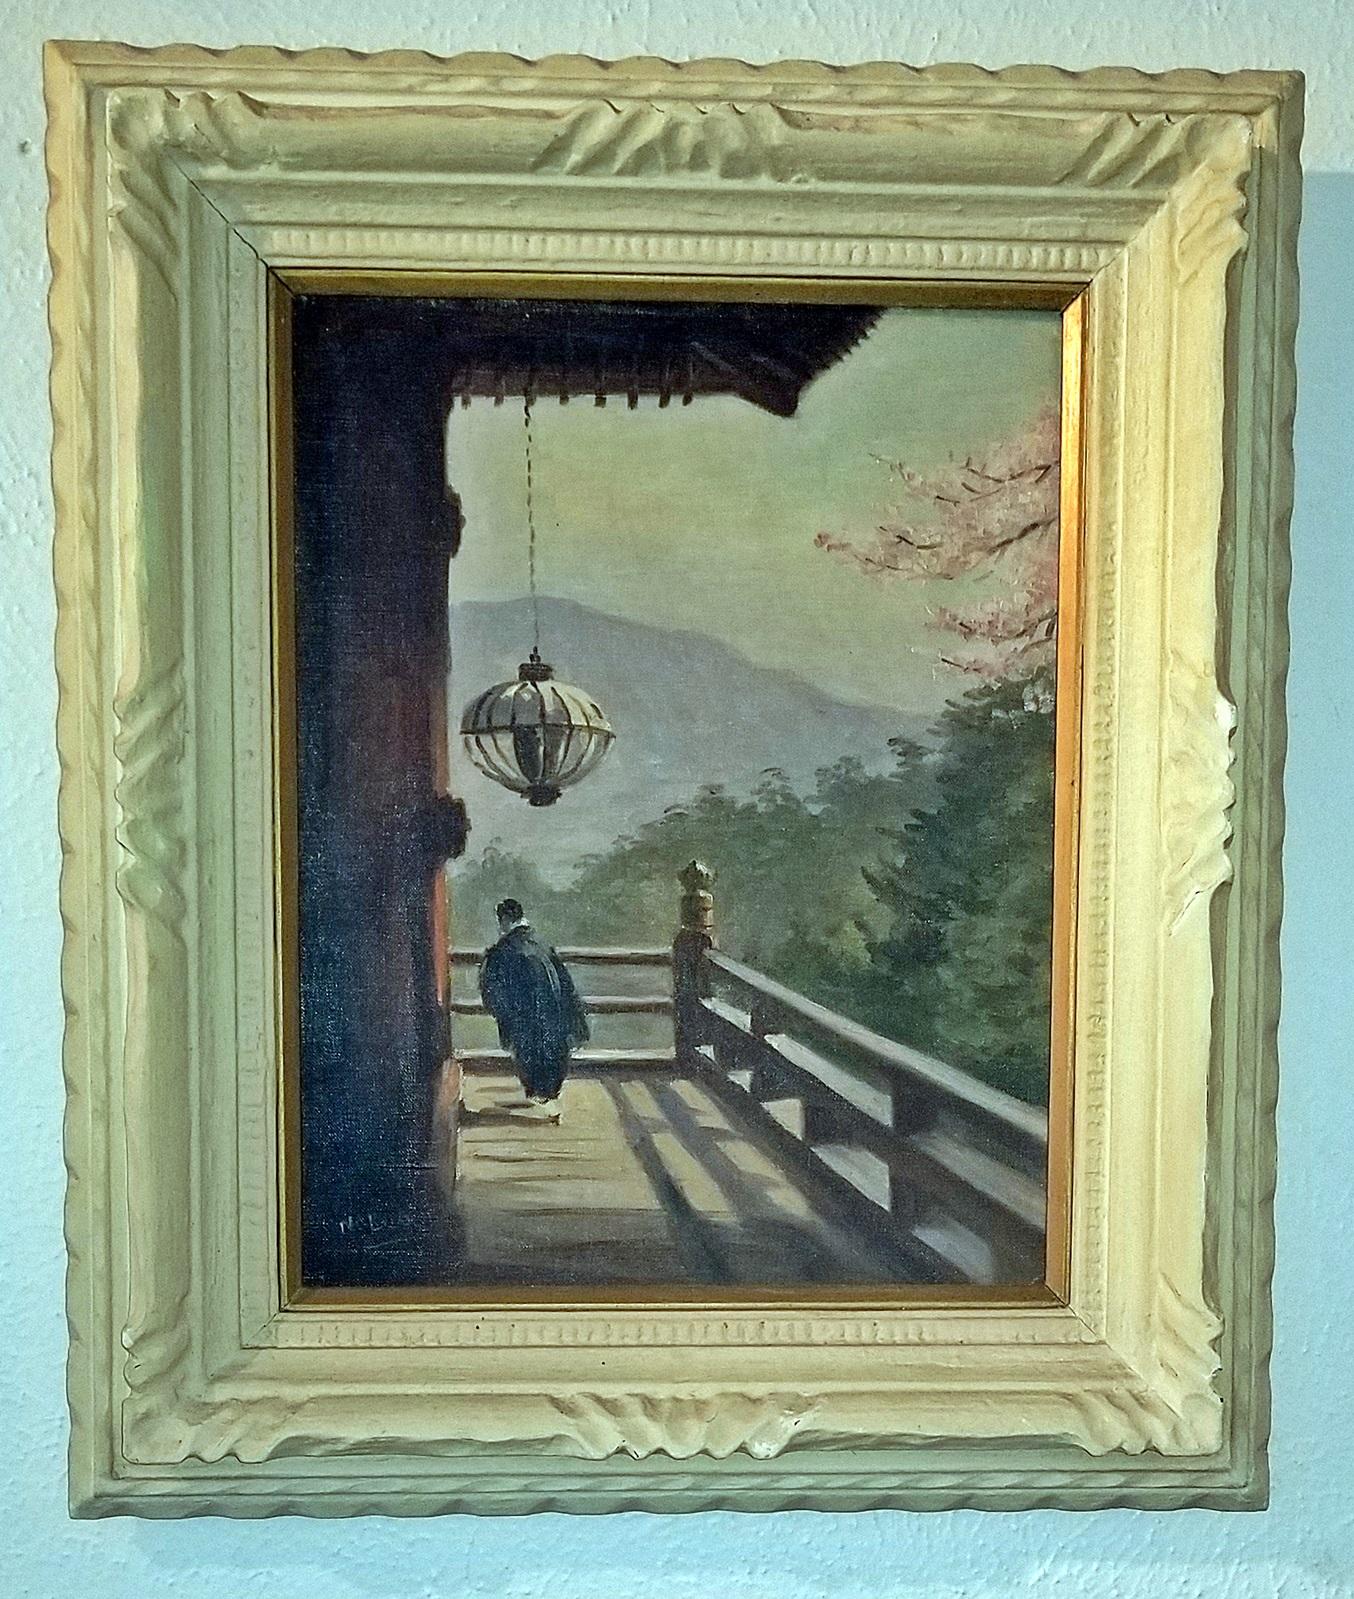 Presenting a gorgeous medium sized oil on canvas, by Japanese Master Impressionist, Hiyashi NoBuo in beautiful original white wood frame.

Beautiful landscape scene of a Japanese man, in traditional kimono clothing, standing on his elevated deck,